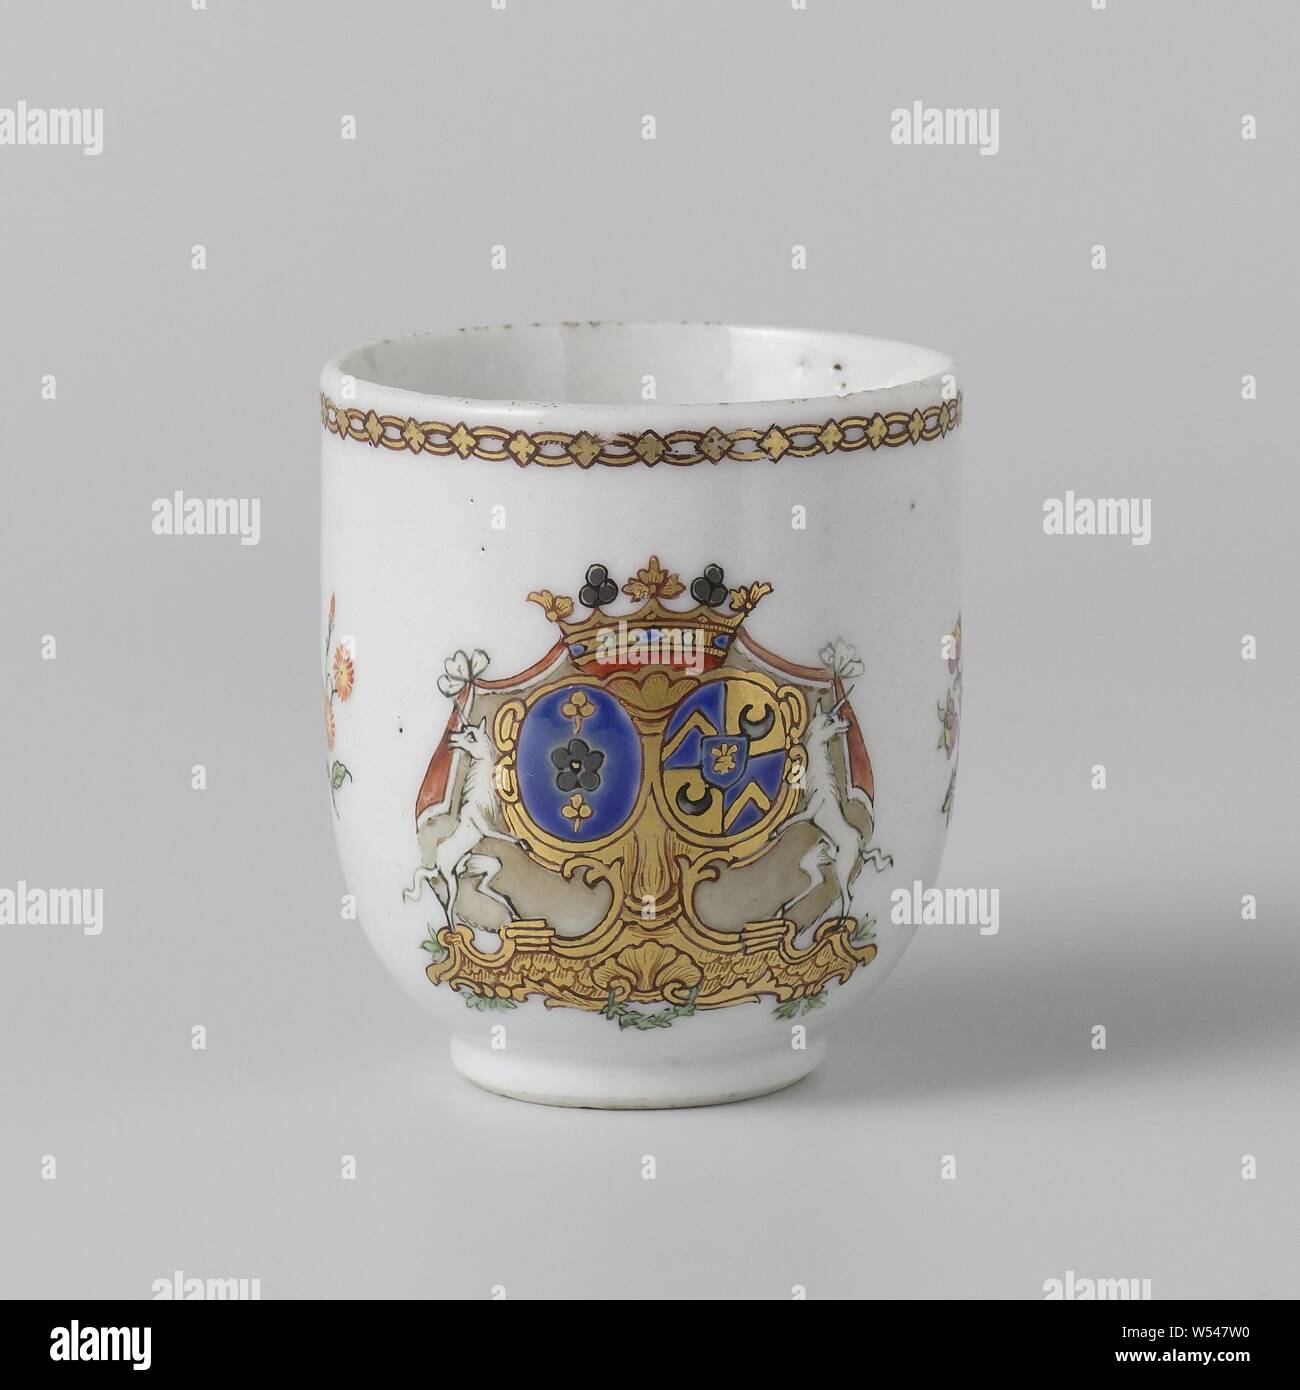 Cup with handle with the arms of the Van Idsinga and Kien families, Porcelain ear cup, painted on the glaze in blue, red, pink, green, yellow, purple, black and gold. On the wall the alliance weapon of the Van Idsinga and Kien families. The coat of arms to the left of the Van Idsinga family has a blue background with a silver rose or flower and a pair of golden clovers. The weapon to the right of the Kien family is divided into four parts: 1. and 4. a blue background with a golden twill, 2. and 3. a golden background with a black moon. In the center of the weapon is a heart shield with a blue Stock Photo